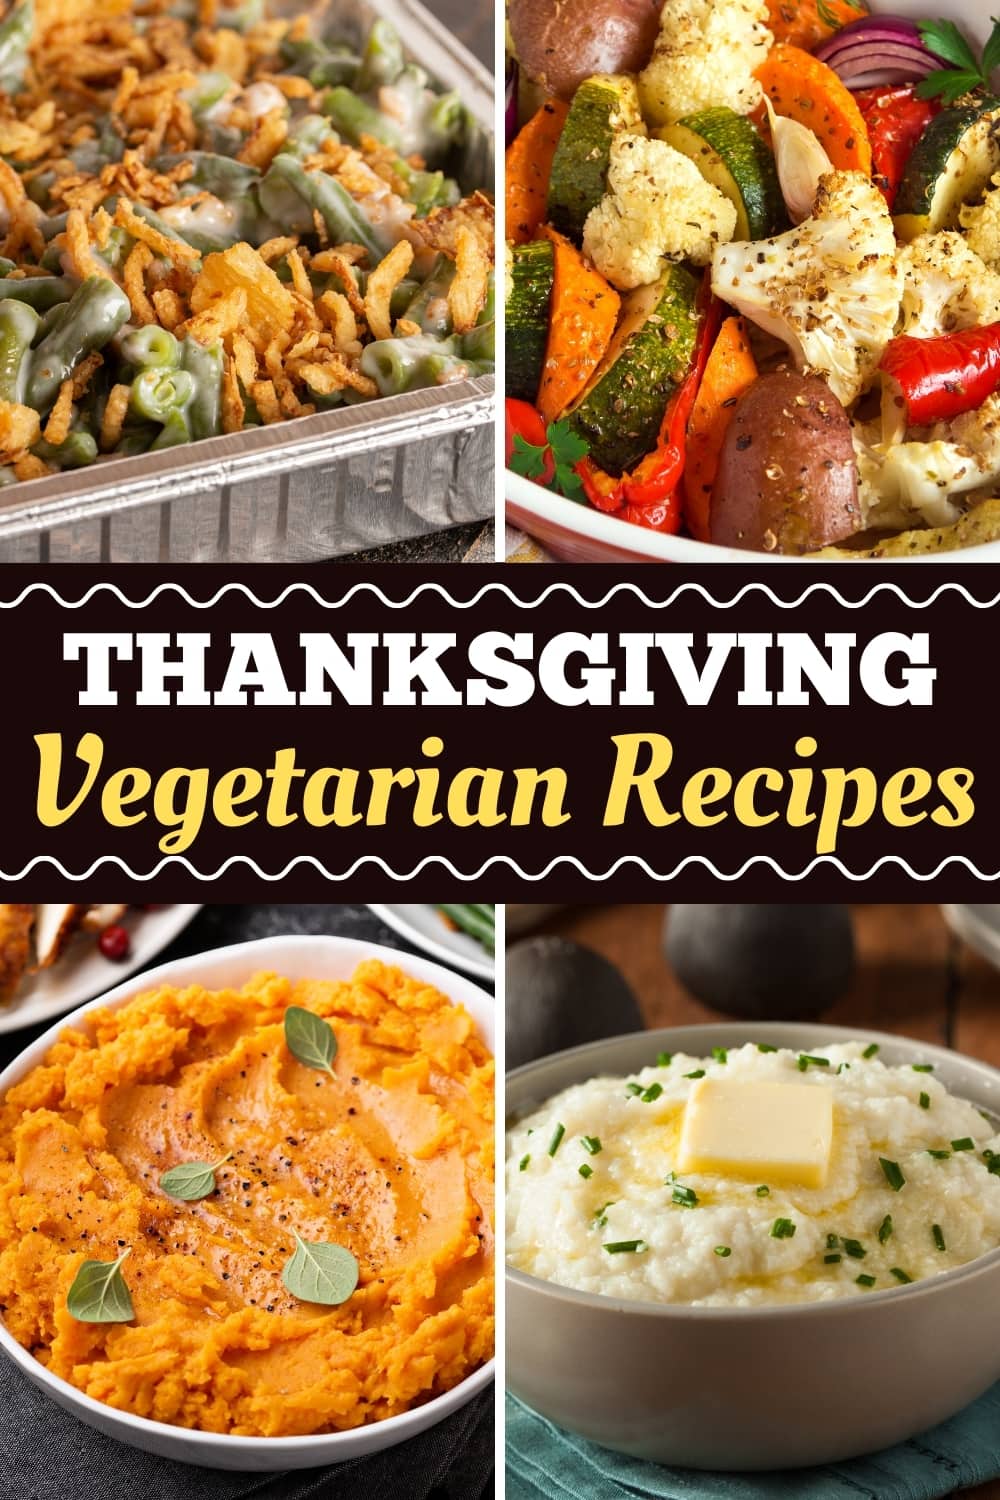 30 Vegetarian Thanksgiving Recipes for a Meatless Dinner - Insanely Good